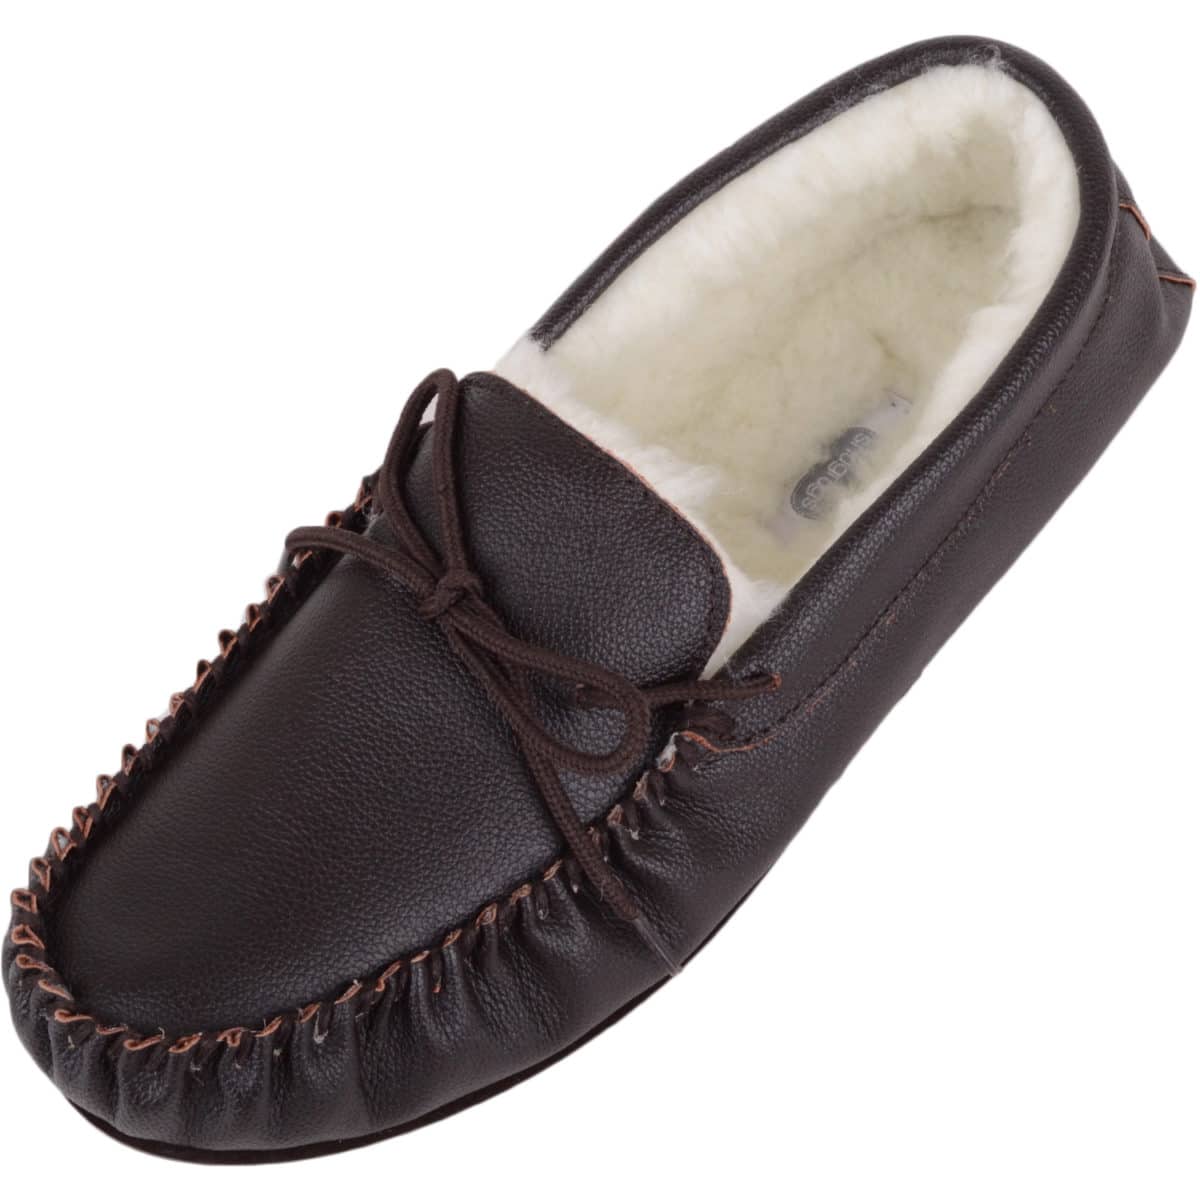 lined moccasin slippers